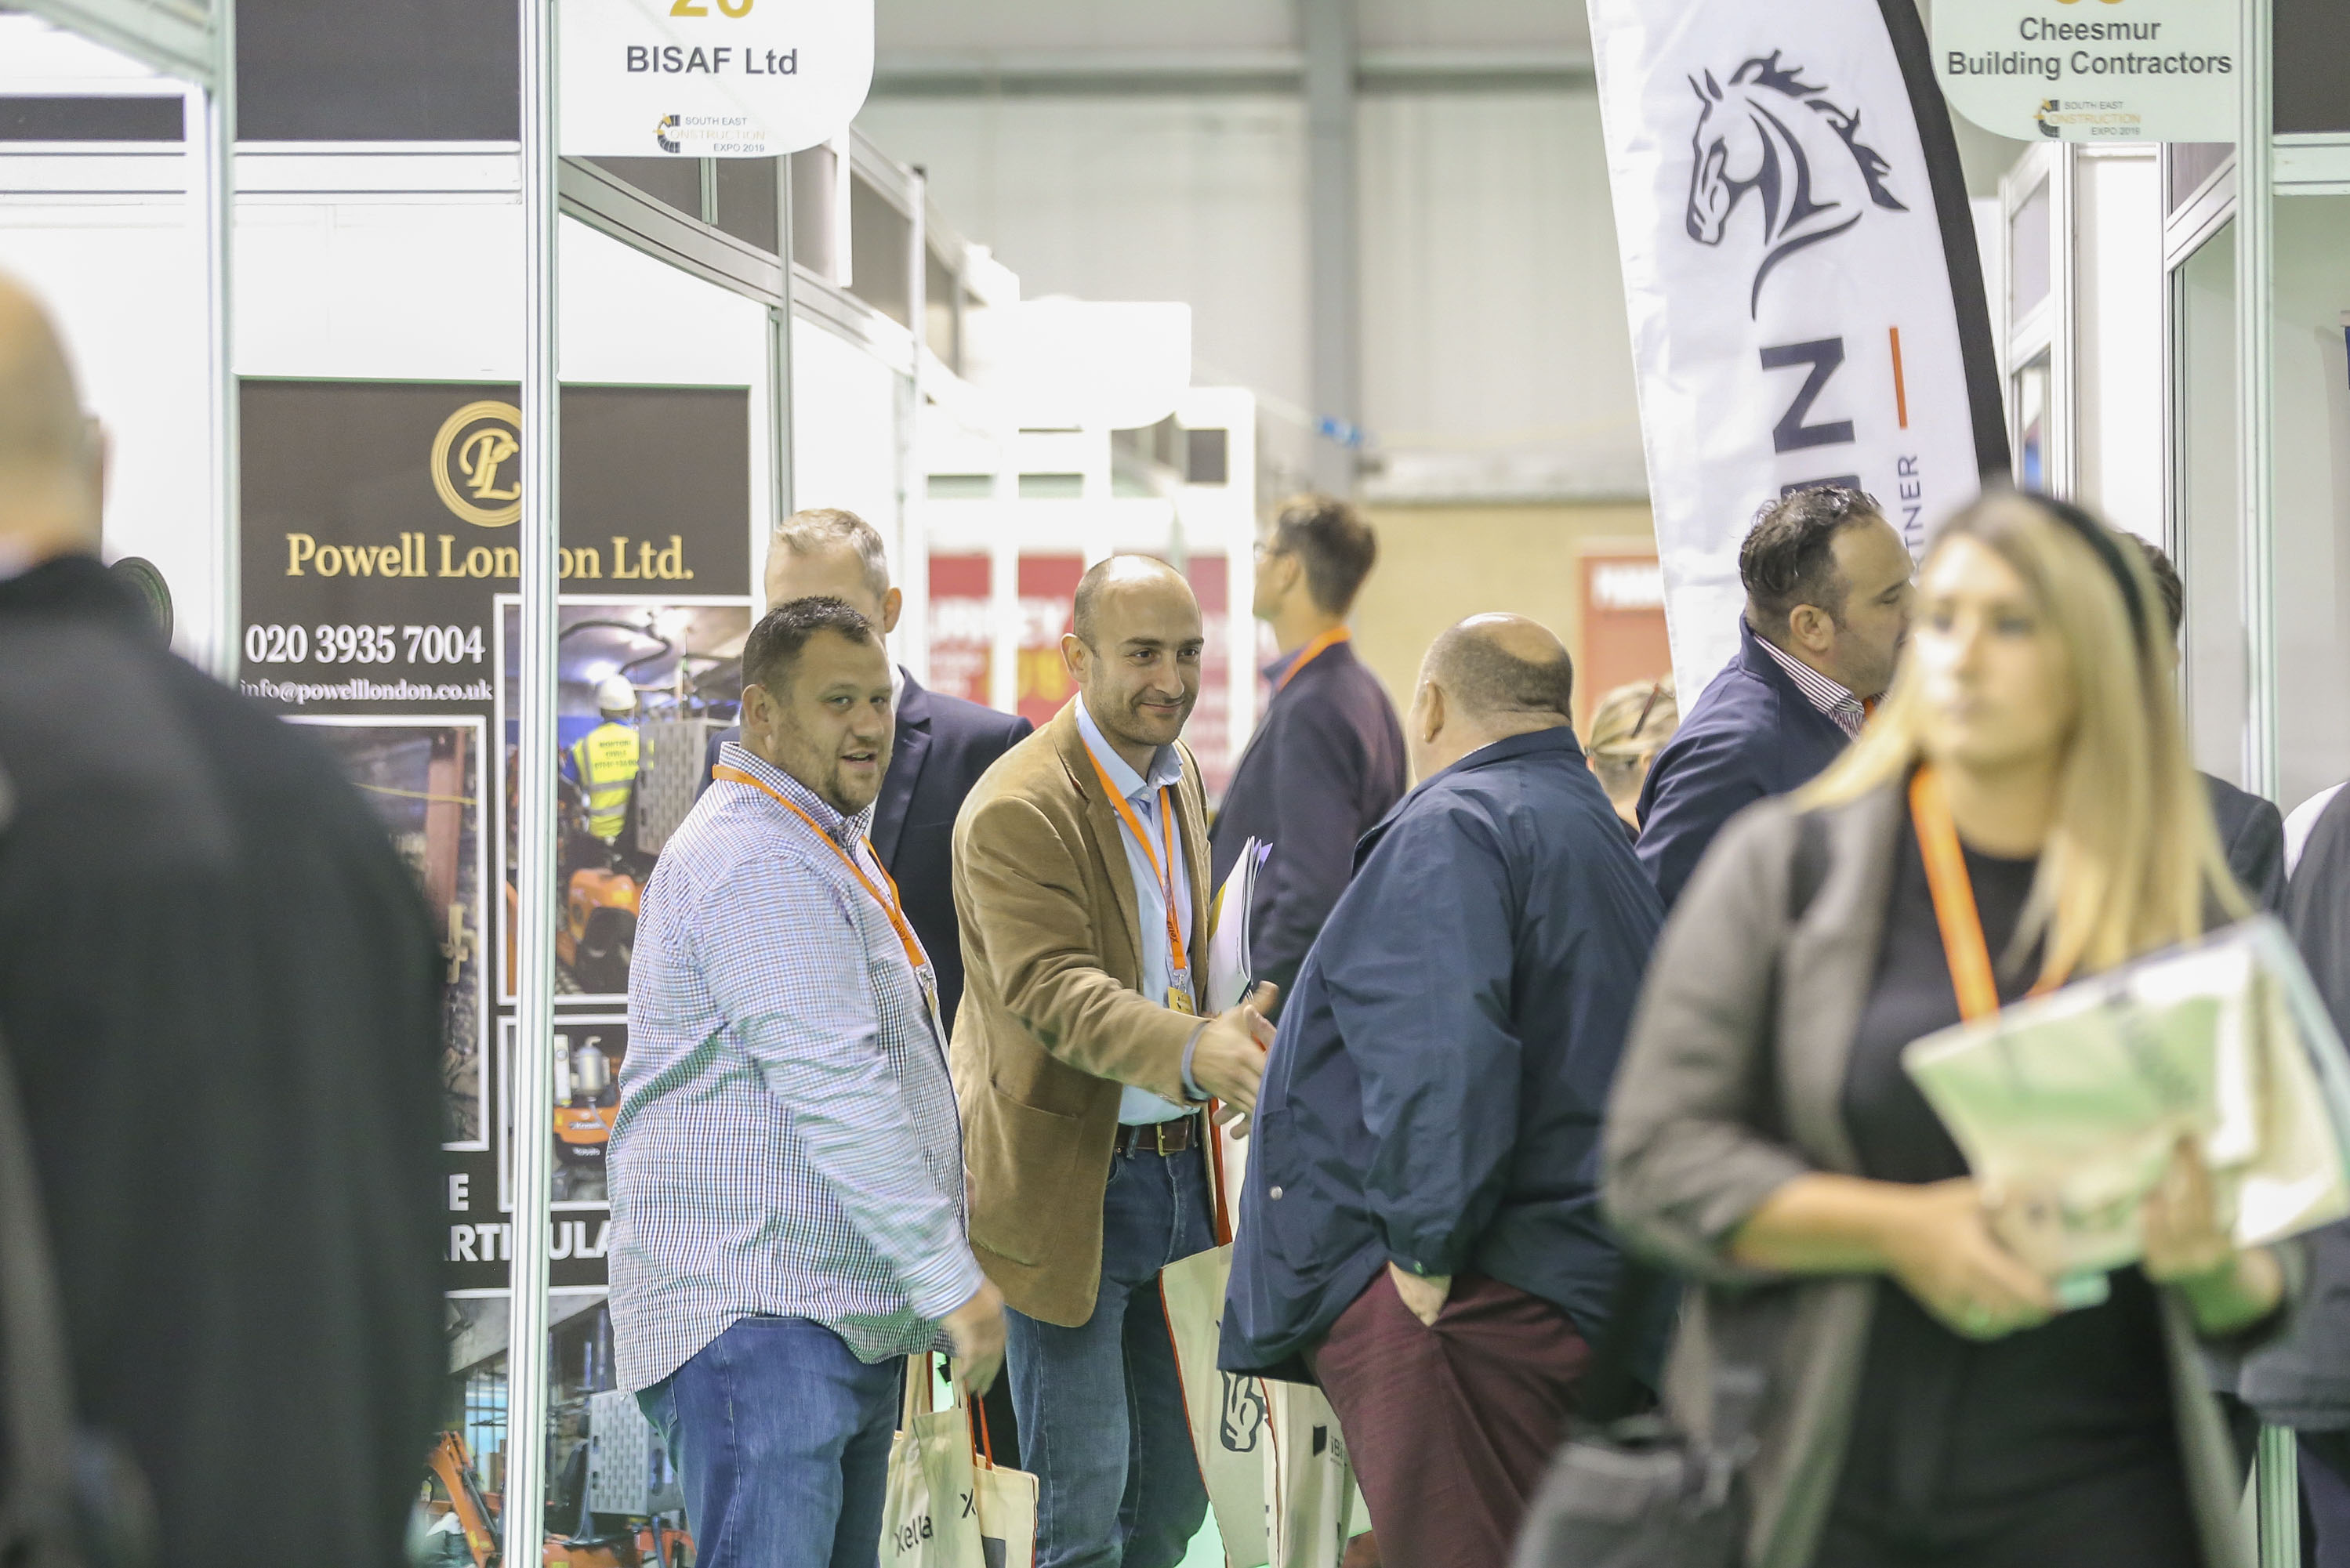 Successful World First at South East Construction Expo 2019 in Sussex @ConstructExpo